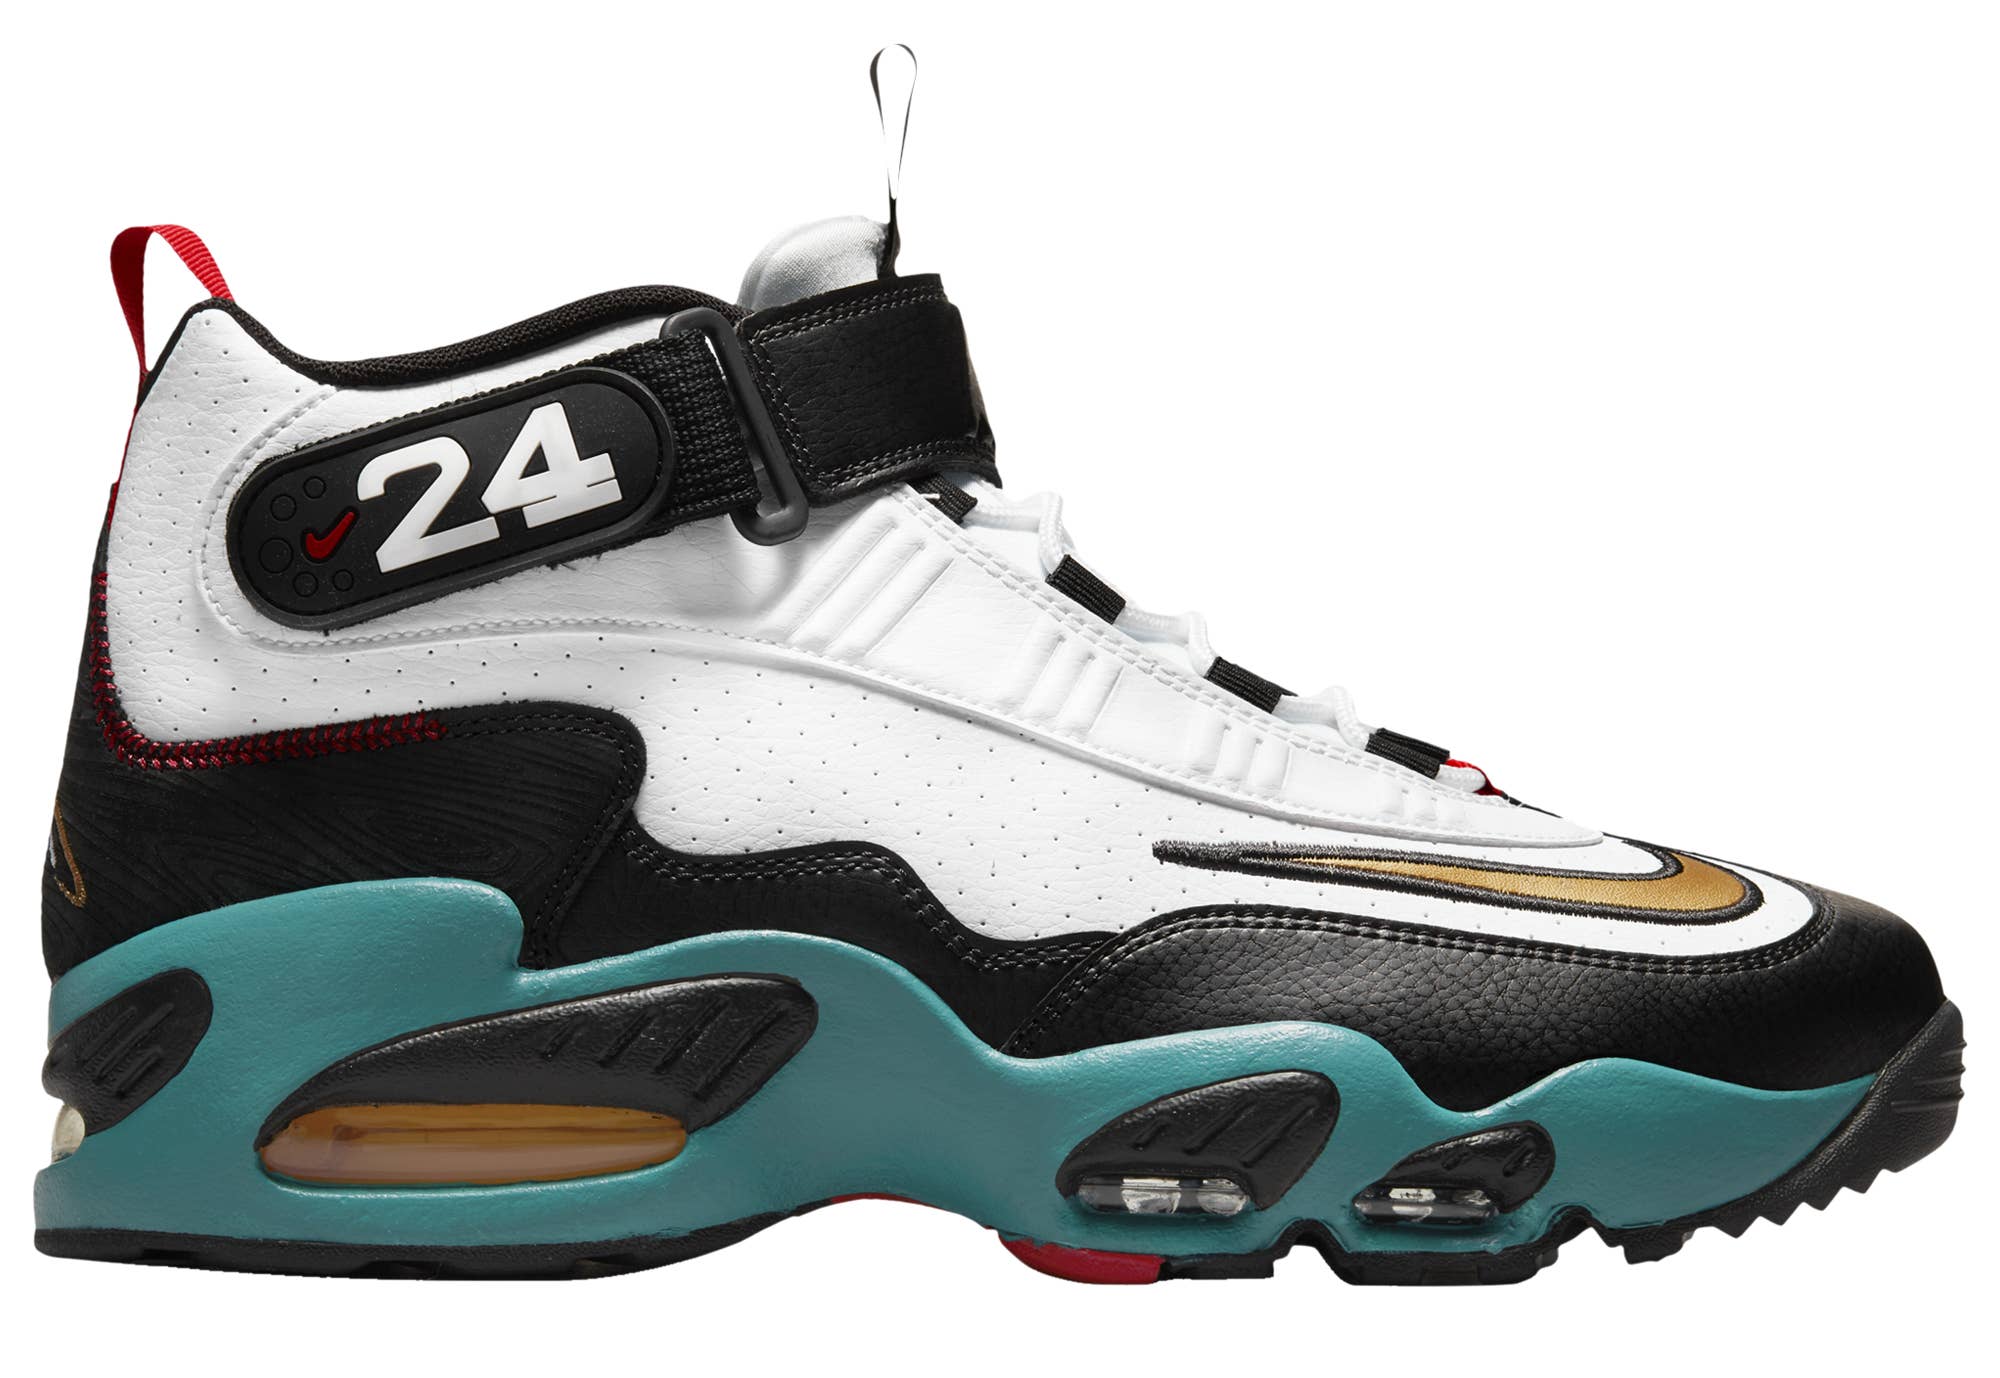 Nike Air Griffey Max 1 ‘The Sweetest Swing’ CD5188-100 Lateral